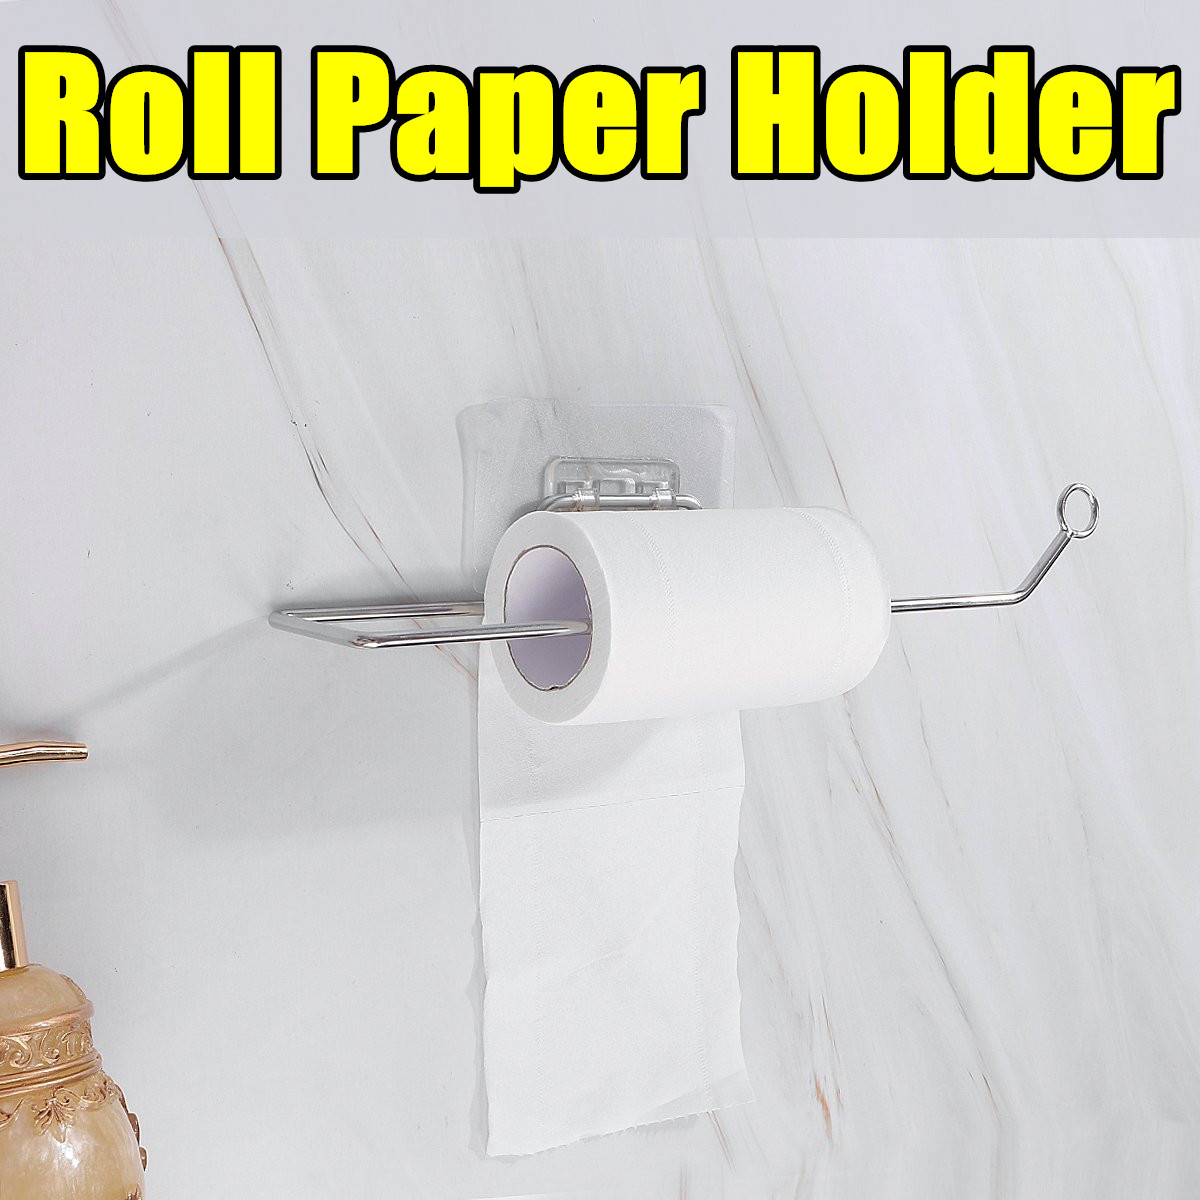 Toilet Kitchen Roll Paper Holder Stainless Steel Repeatedly Washable Stick Hooks Rack Bathroom Storage Accessories